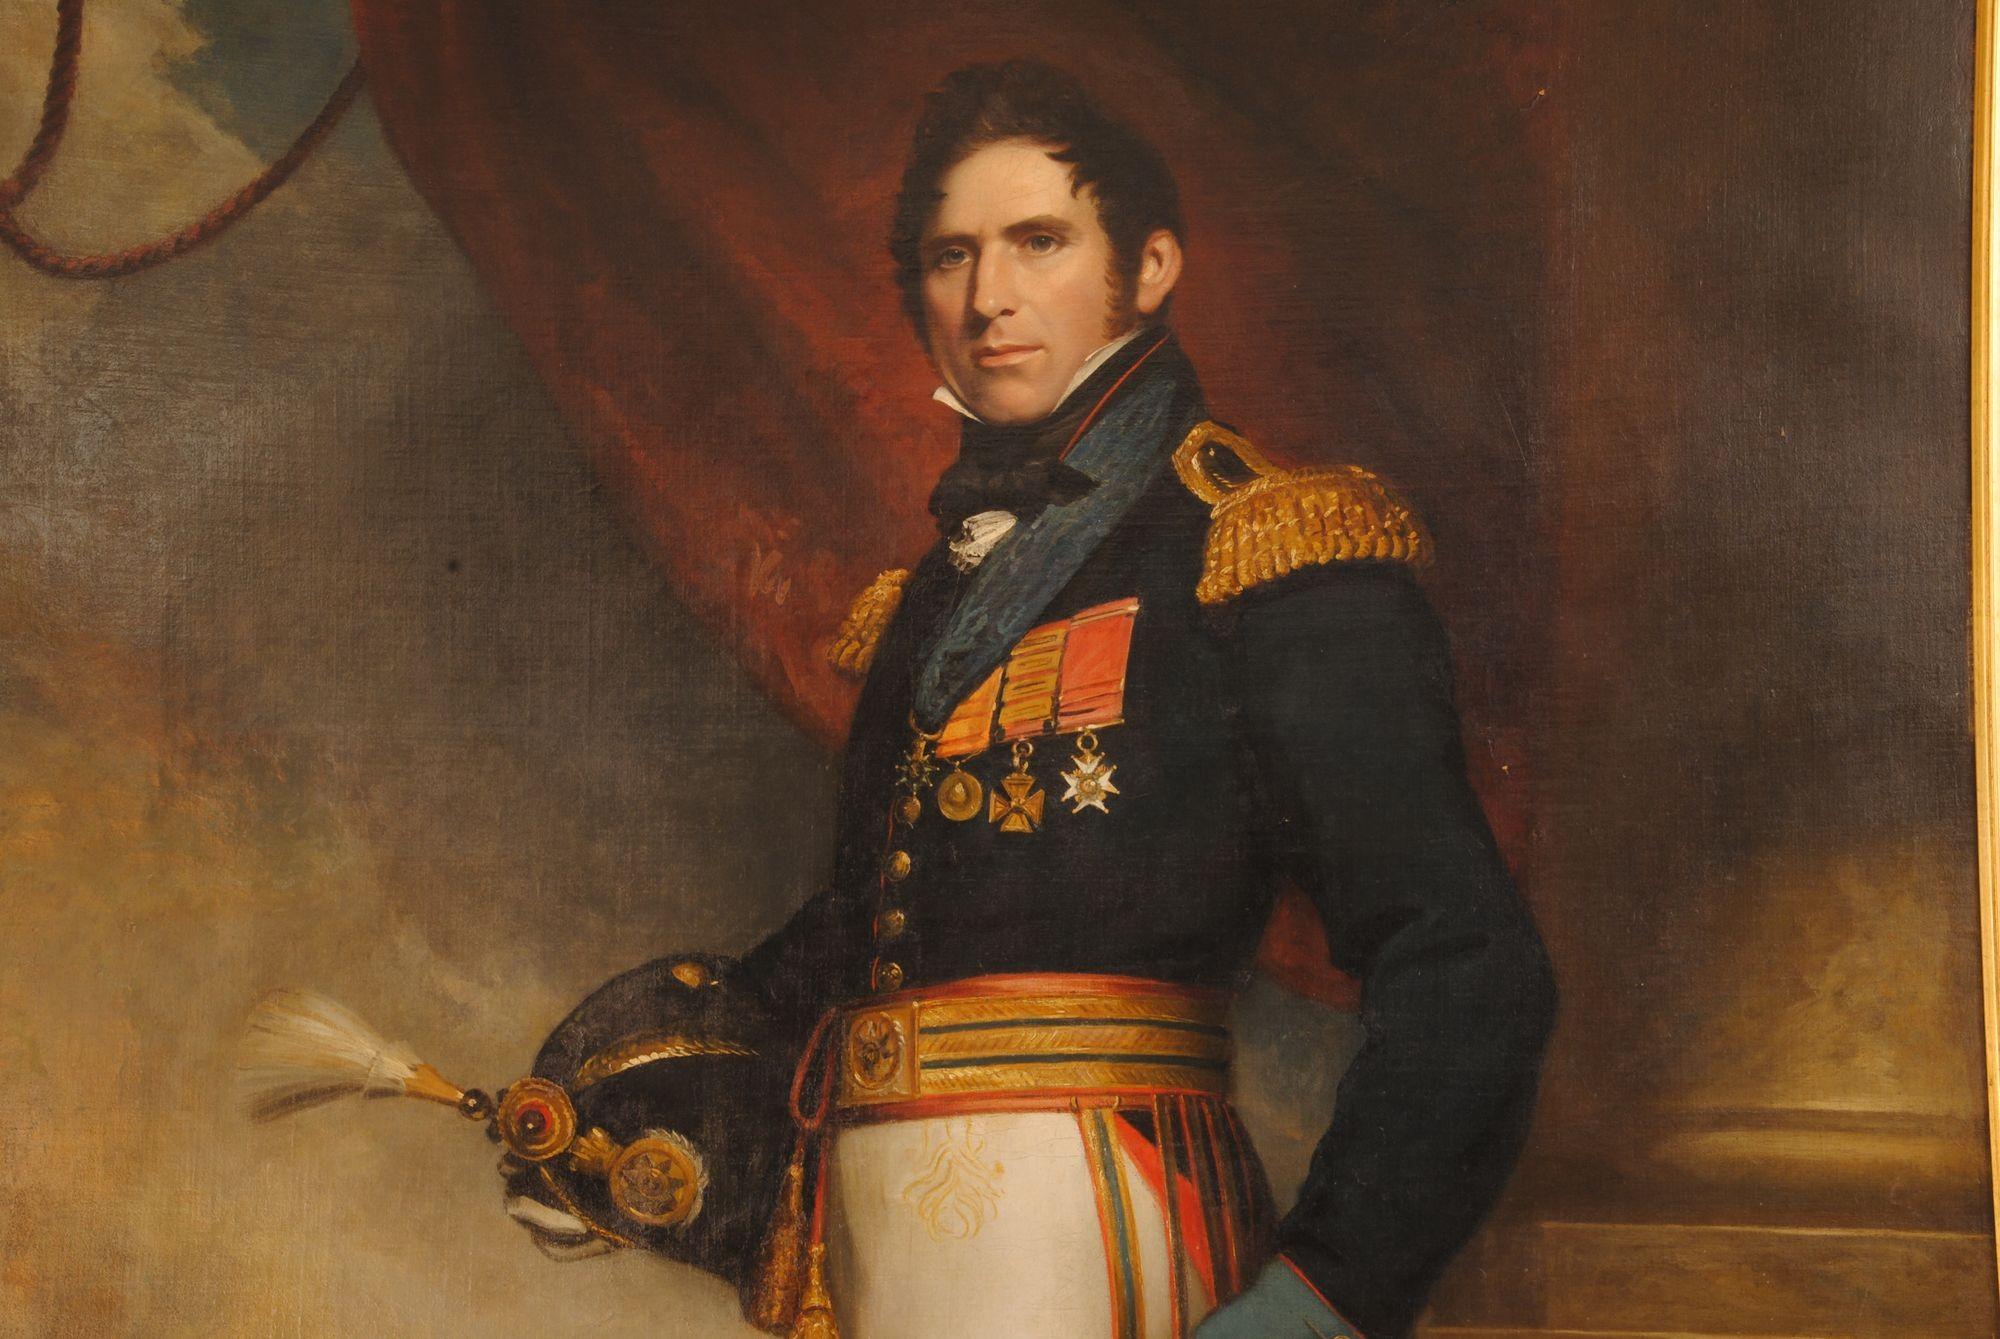 This full lenght portrait is of a British officer who fought during the Napoleonic Wars due to the
Orders, Decorations & Medals he's wearing: round his neck he appears to have
the Portuguese Order of the Tower & Sword, then from left to right as